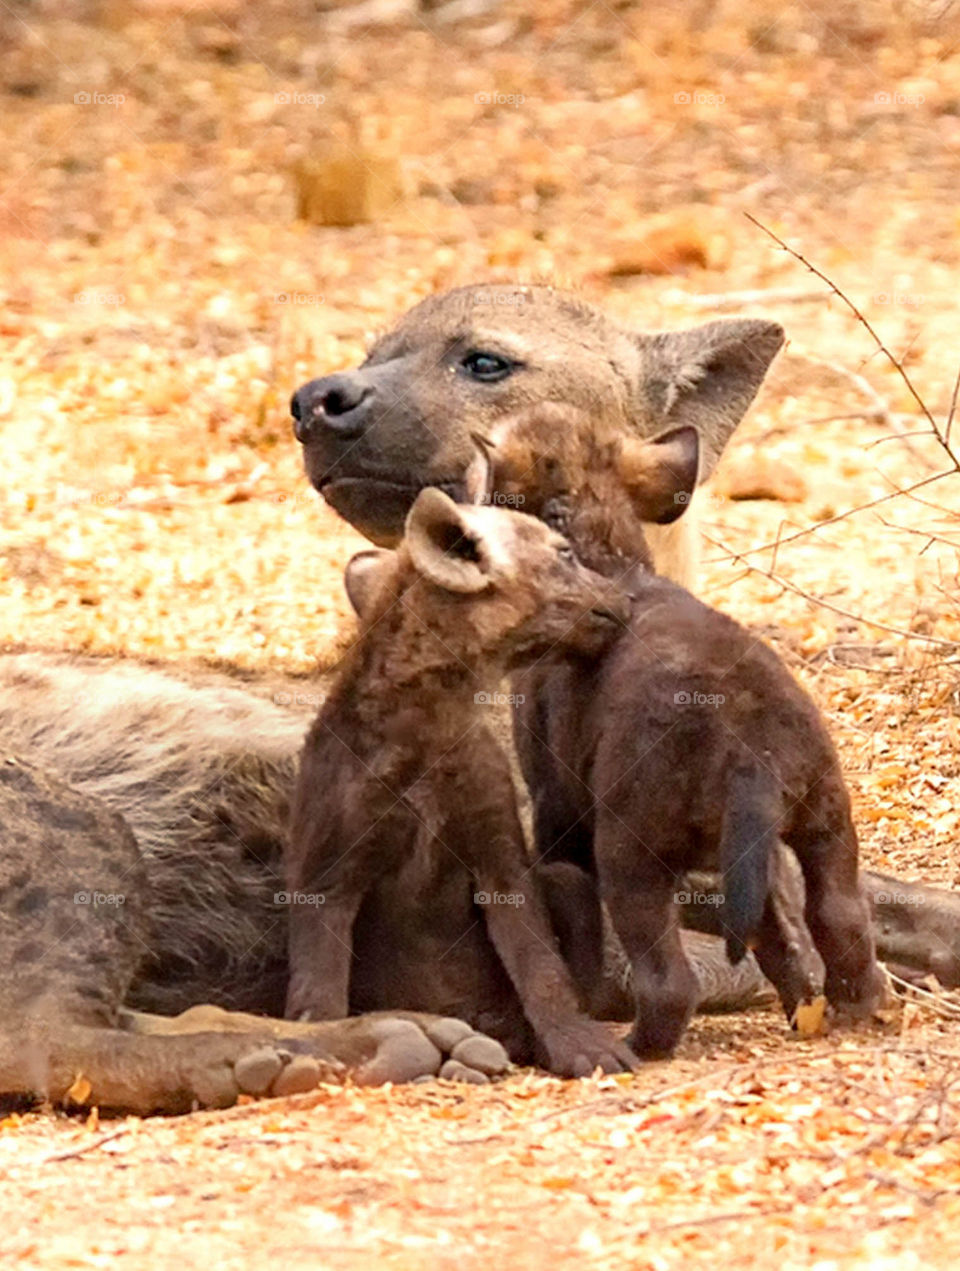 Hyena family love. Hyena cubs cuddling close to mom. Kruger Park, South Africa.